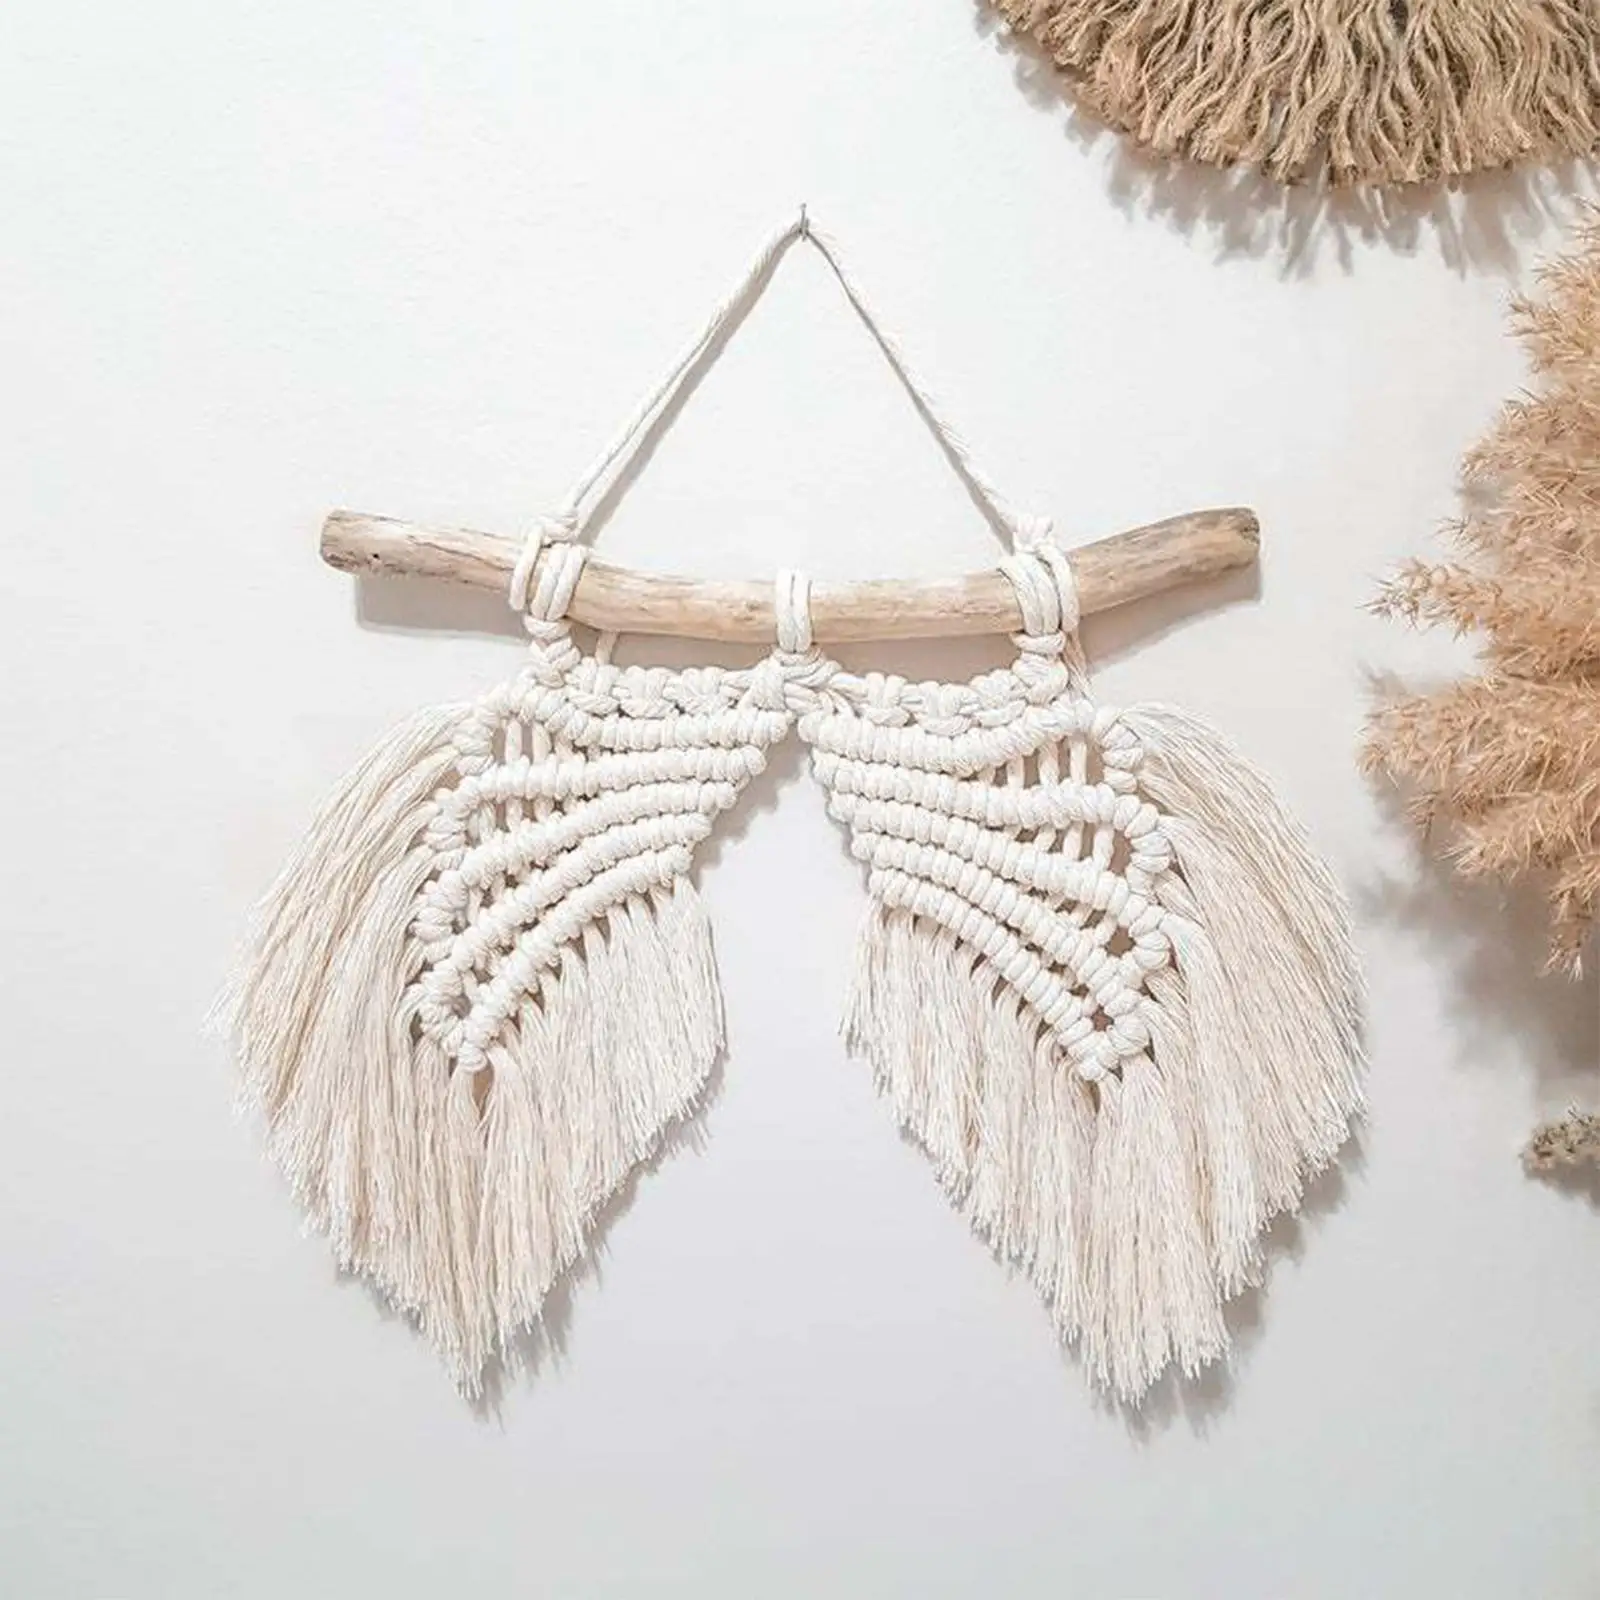 Macrame Tapestry Woven Wing Wall Hanging Pendant for Home Dorm Decoration